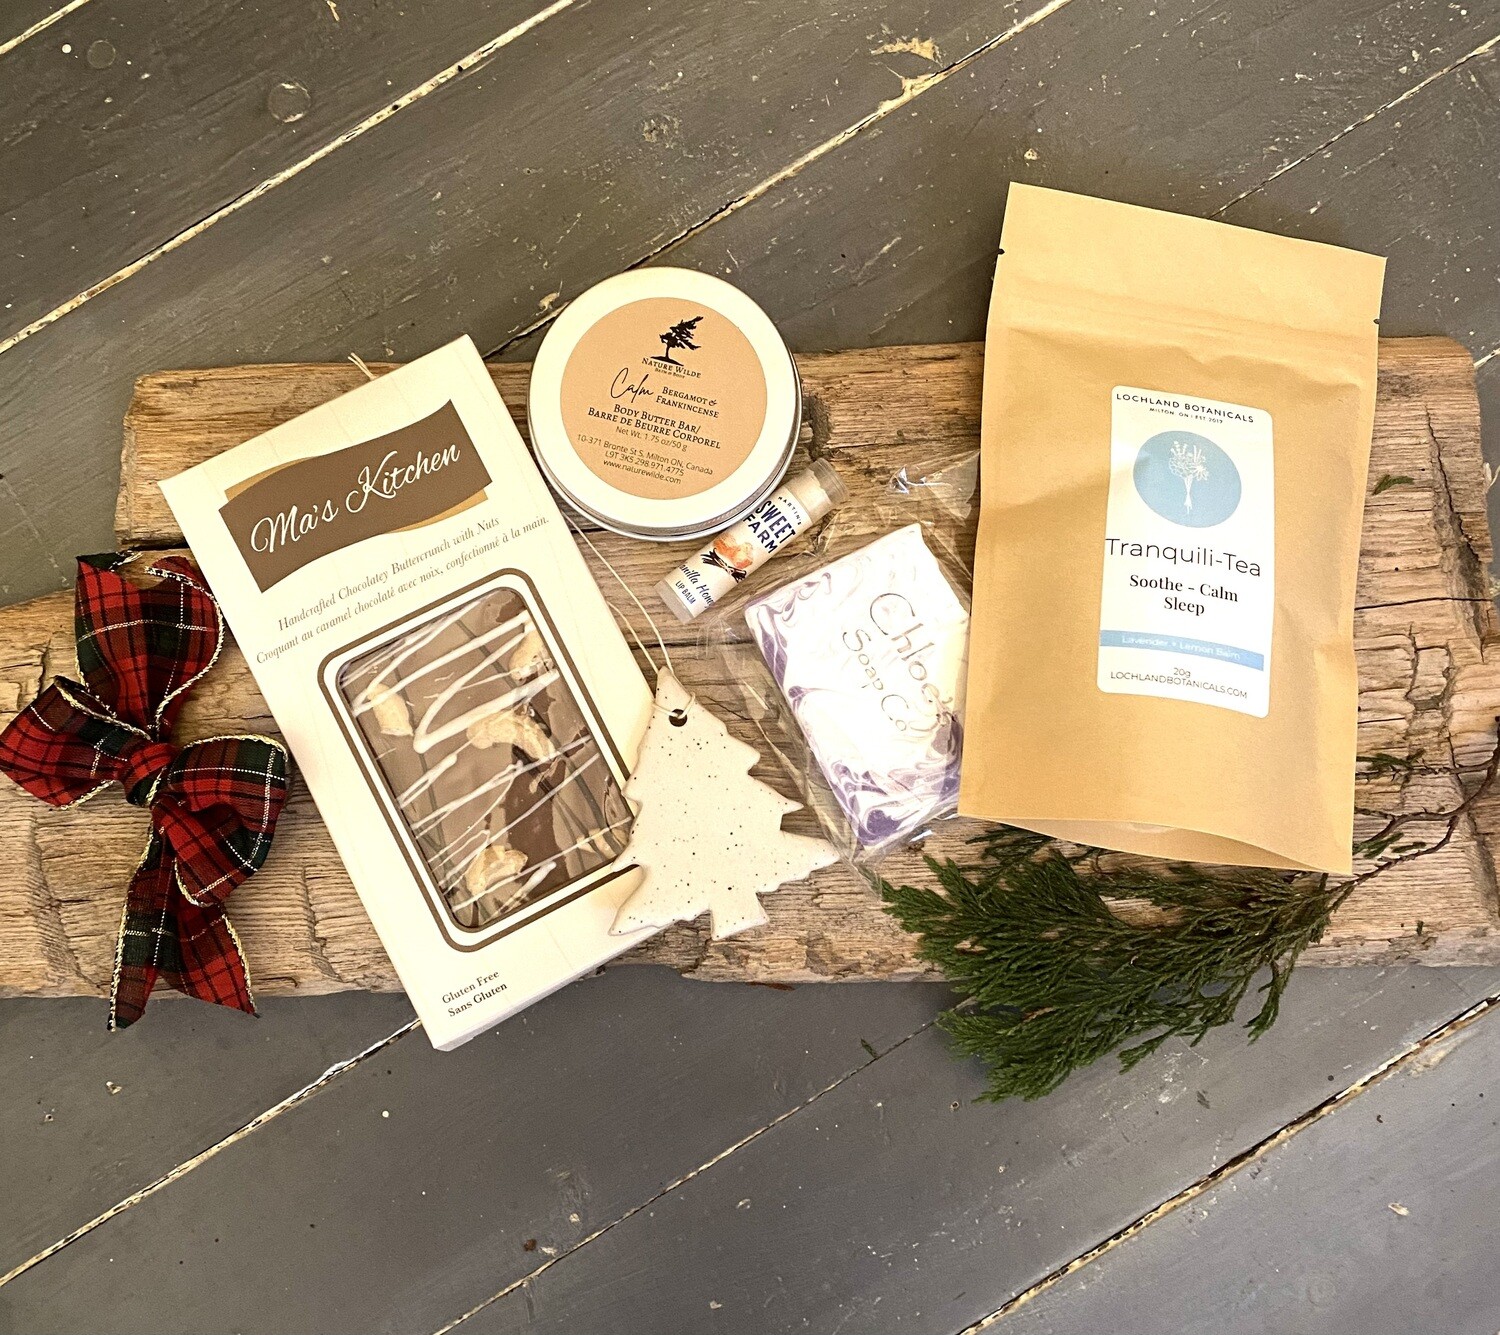 Self Care Gift Basket - $5 Goes To Pack a Bag Foundation